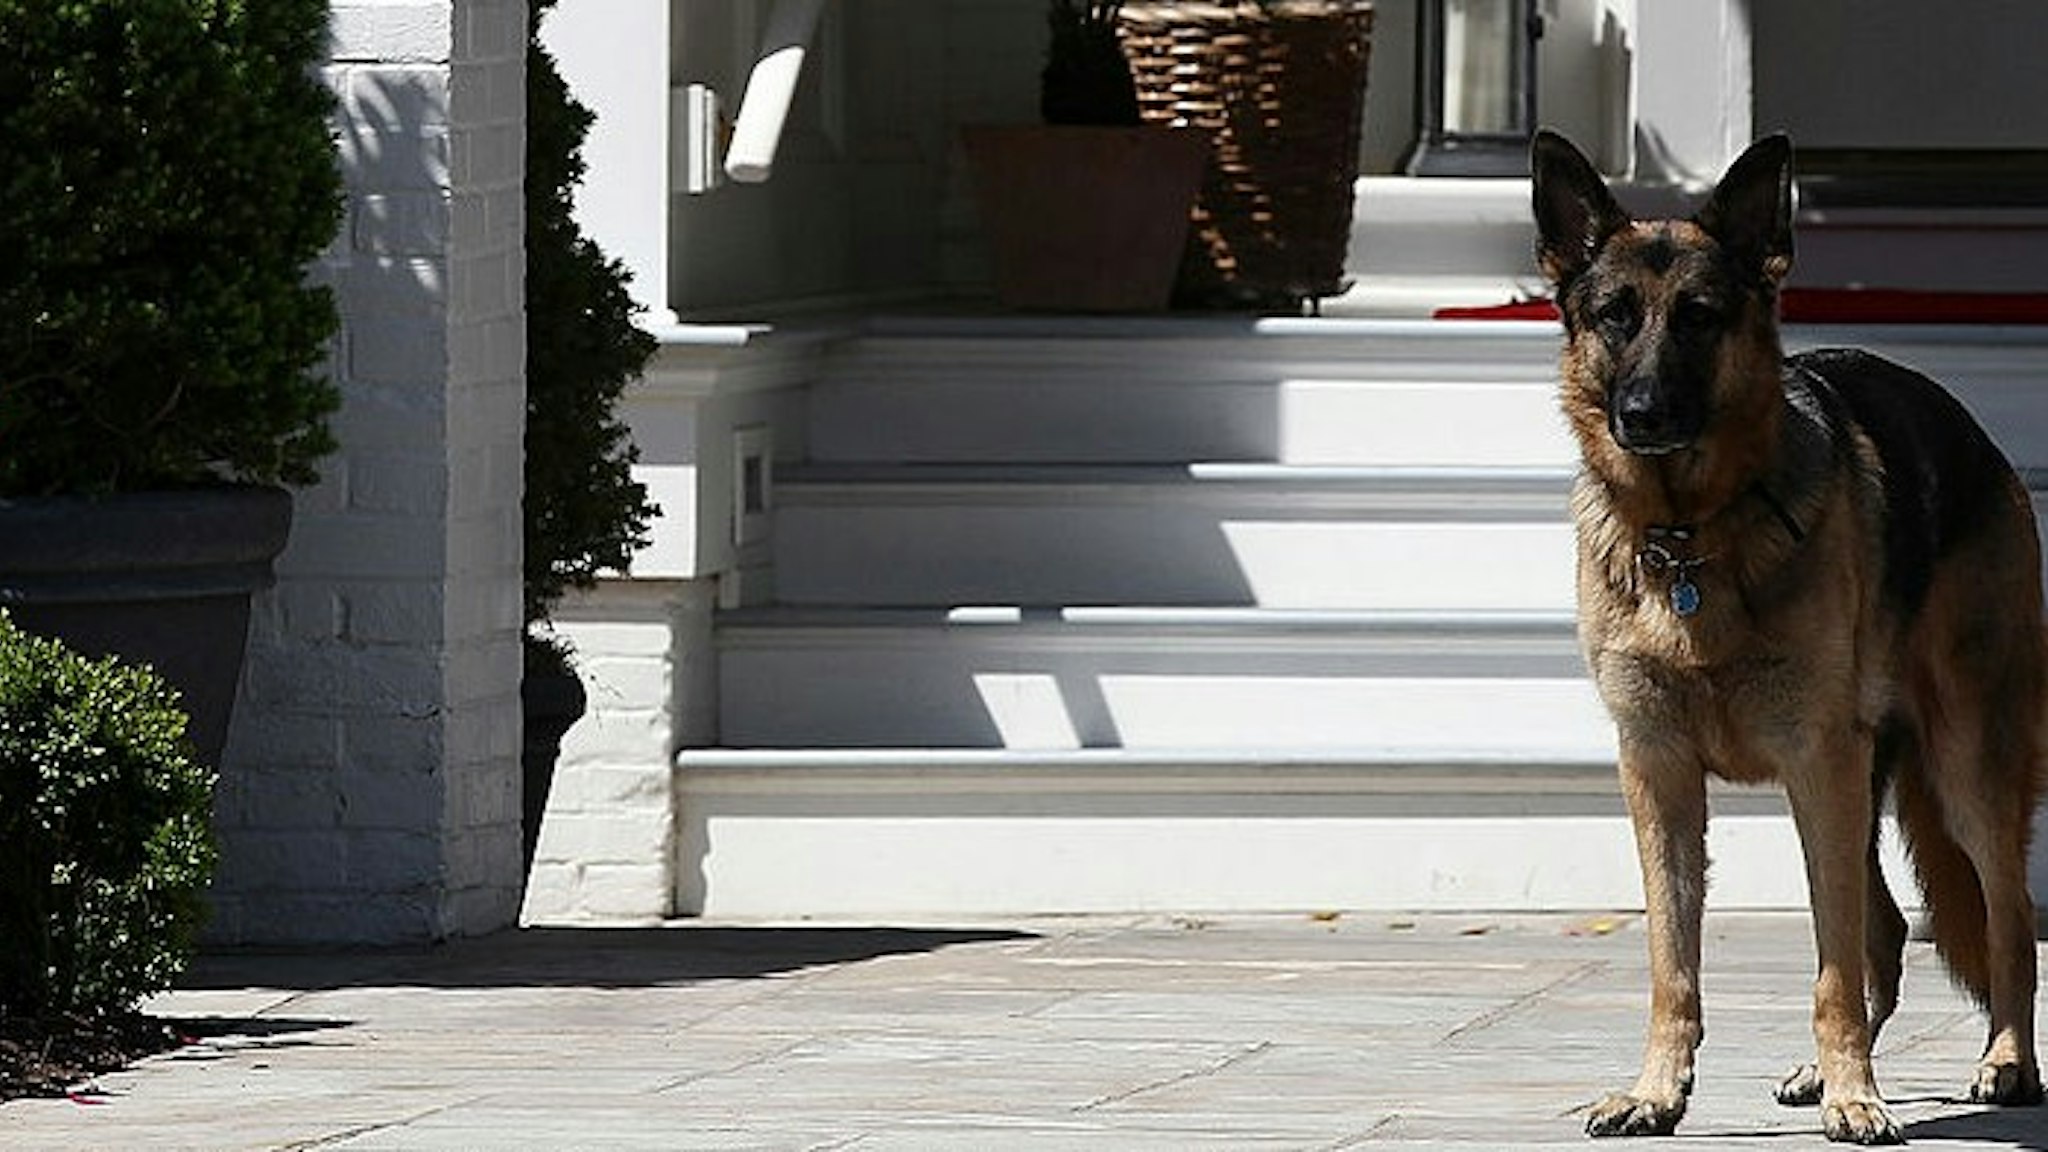 WASHINGTON, DC - MAY 10: Vice President Joe Biden's dog, Champ, stands during speechs during a Joining Forces service event at the Vice President's residence at the Naval Observatory May 10, 2012 in Washington, DC. U.S. first lady Michelle Obama and Biden joined with Congressional spouses to assemble Mother's Day packages that deployed troops have requested to be sent to their mothers and wives at home. (Photo by